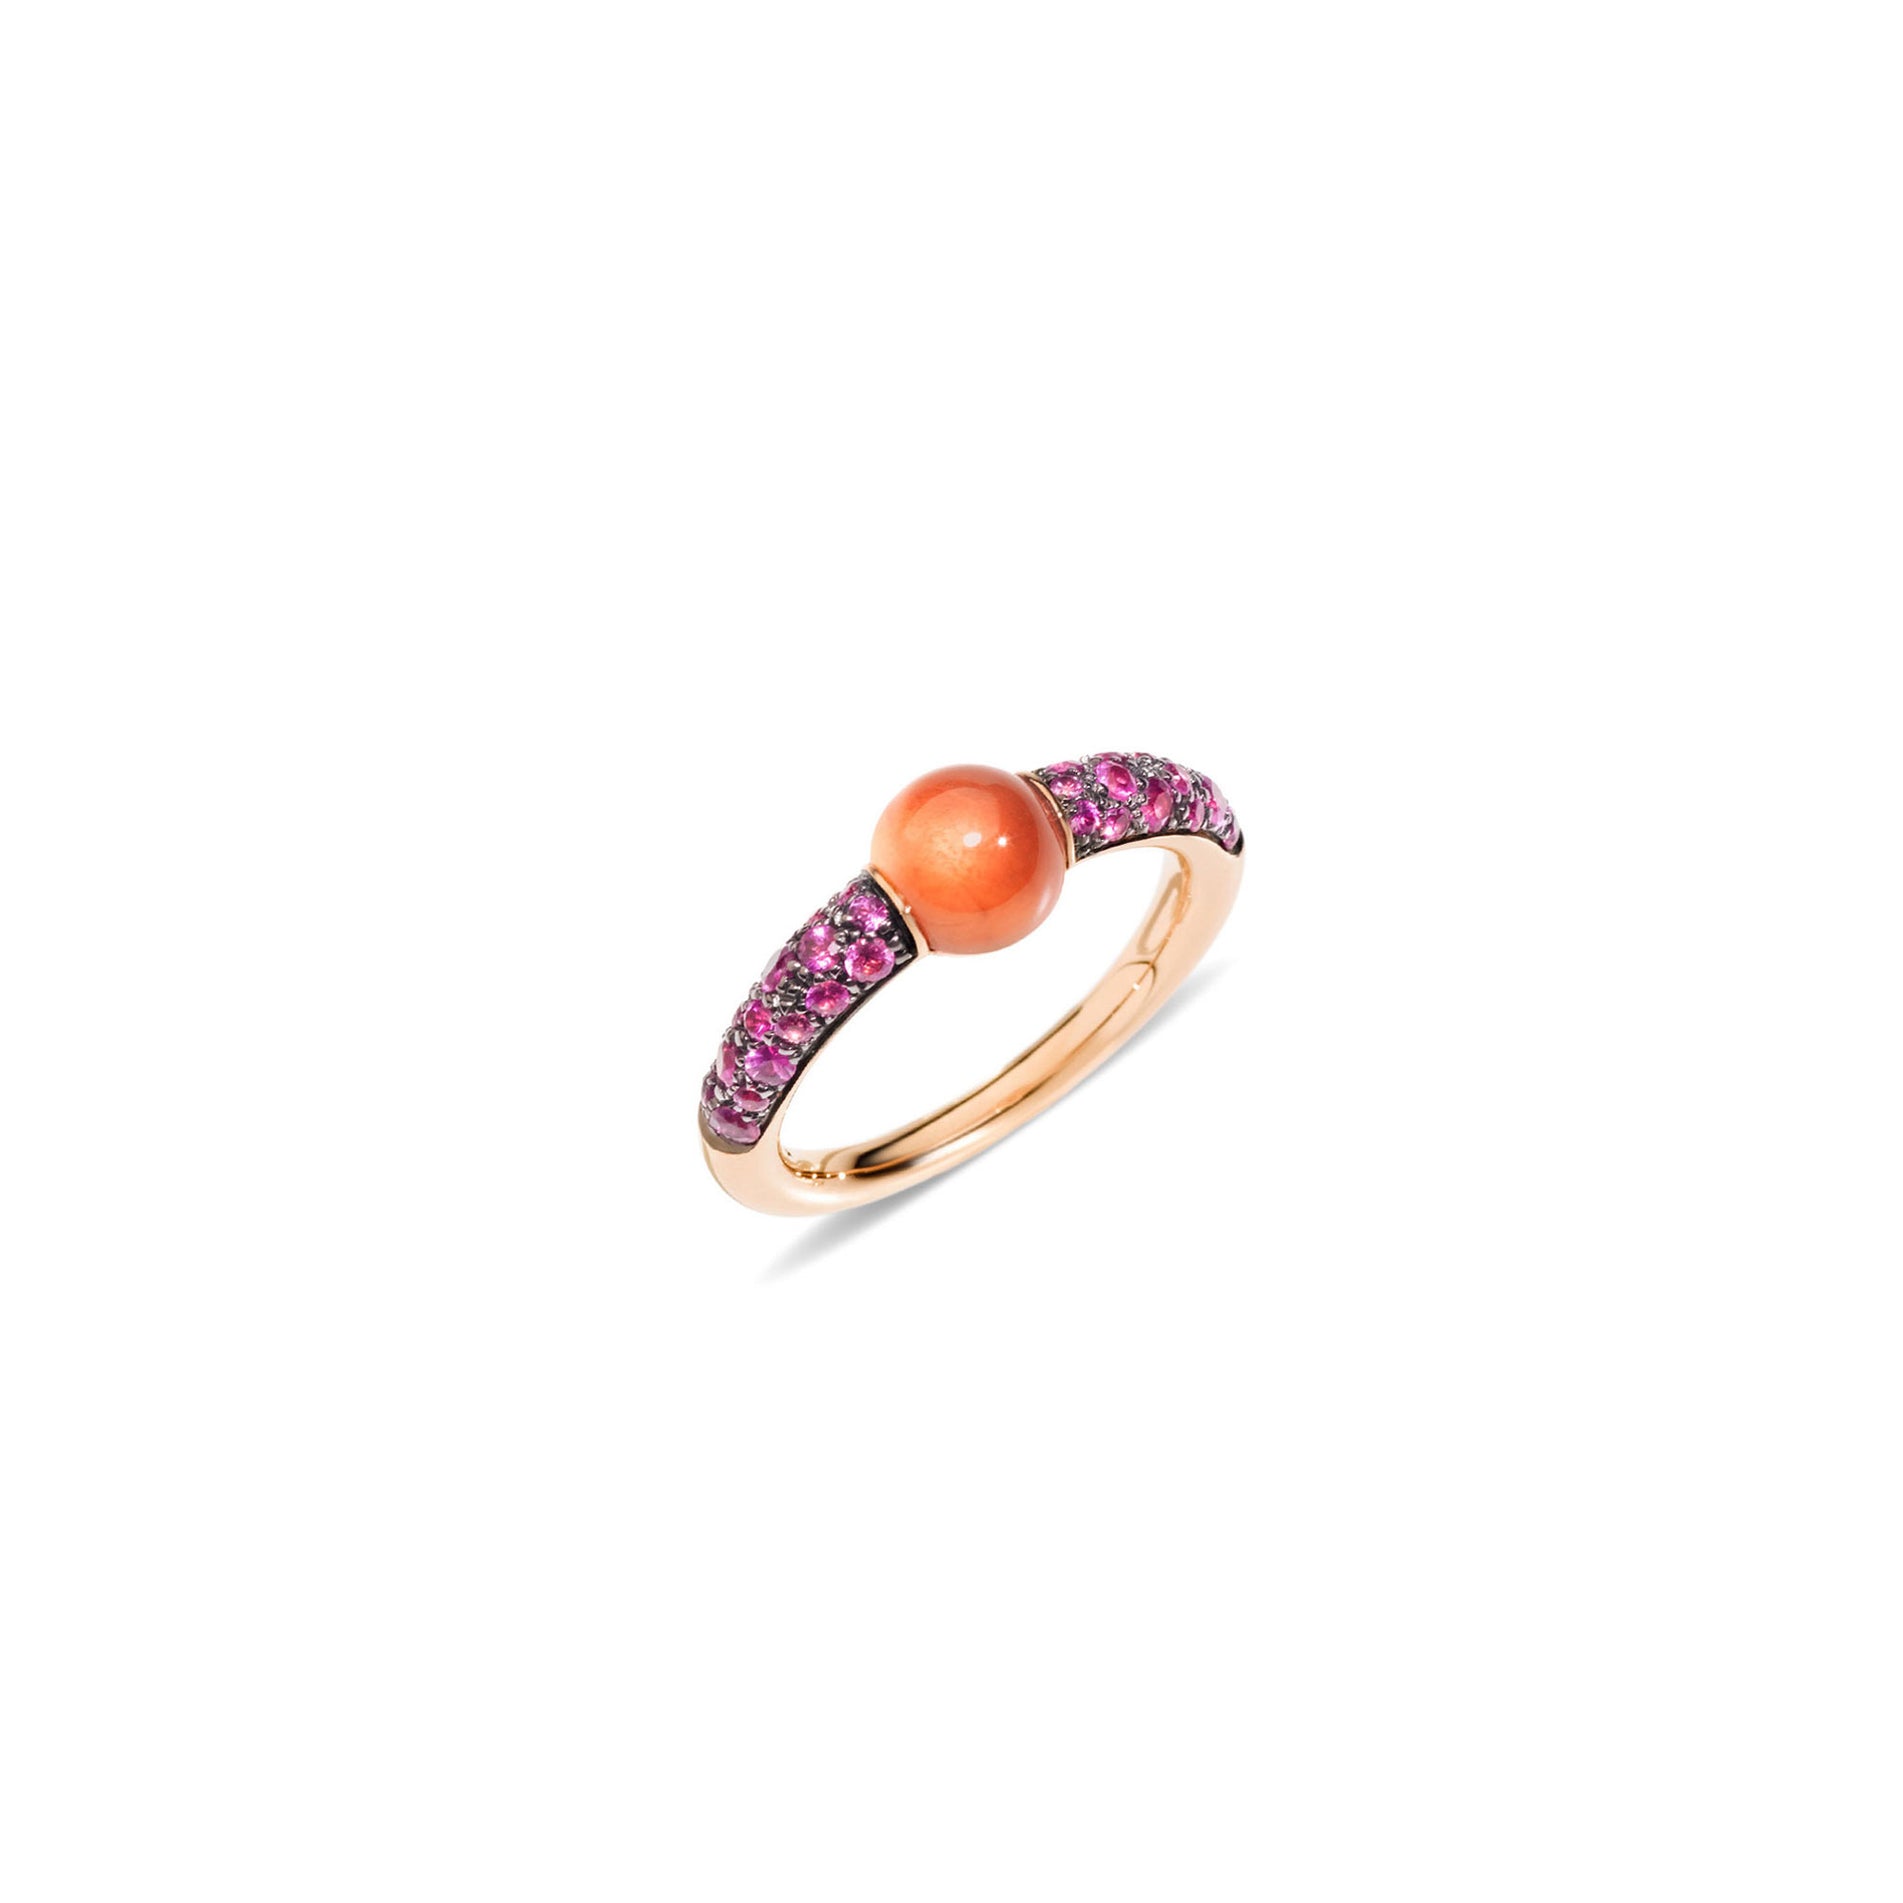 M'ama non M'ama Ring in 18k Rose Gold with Hessonite Garnet and Pink Sapphires - Orsini Jewellers NZ